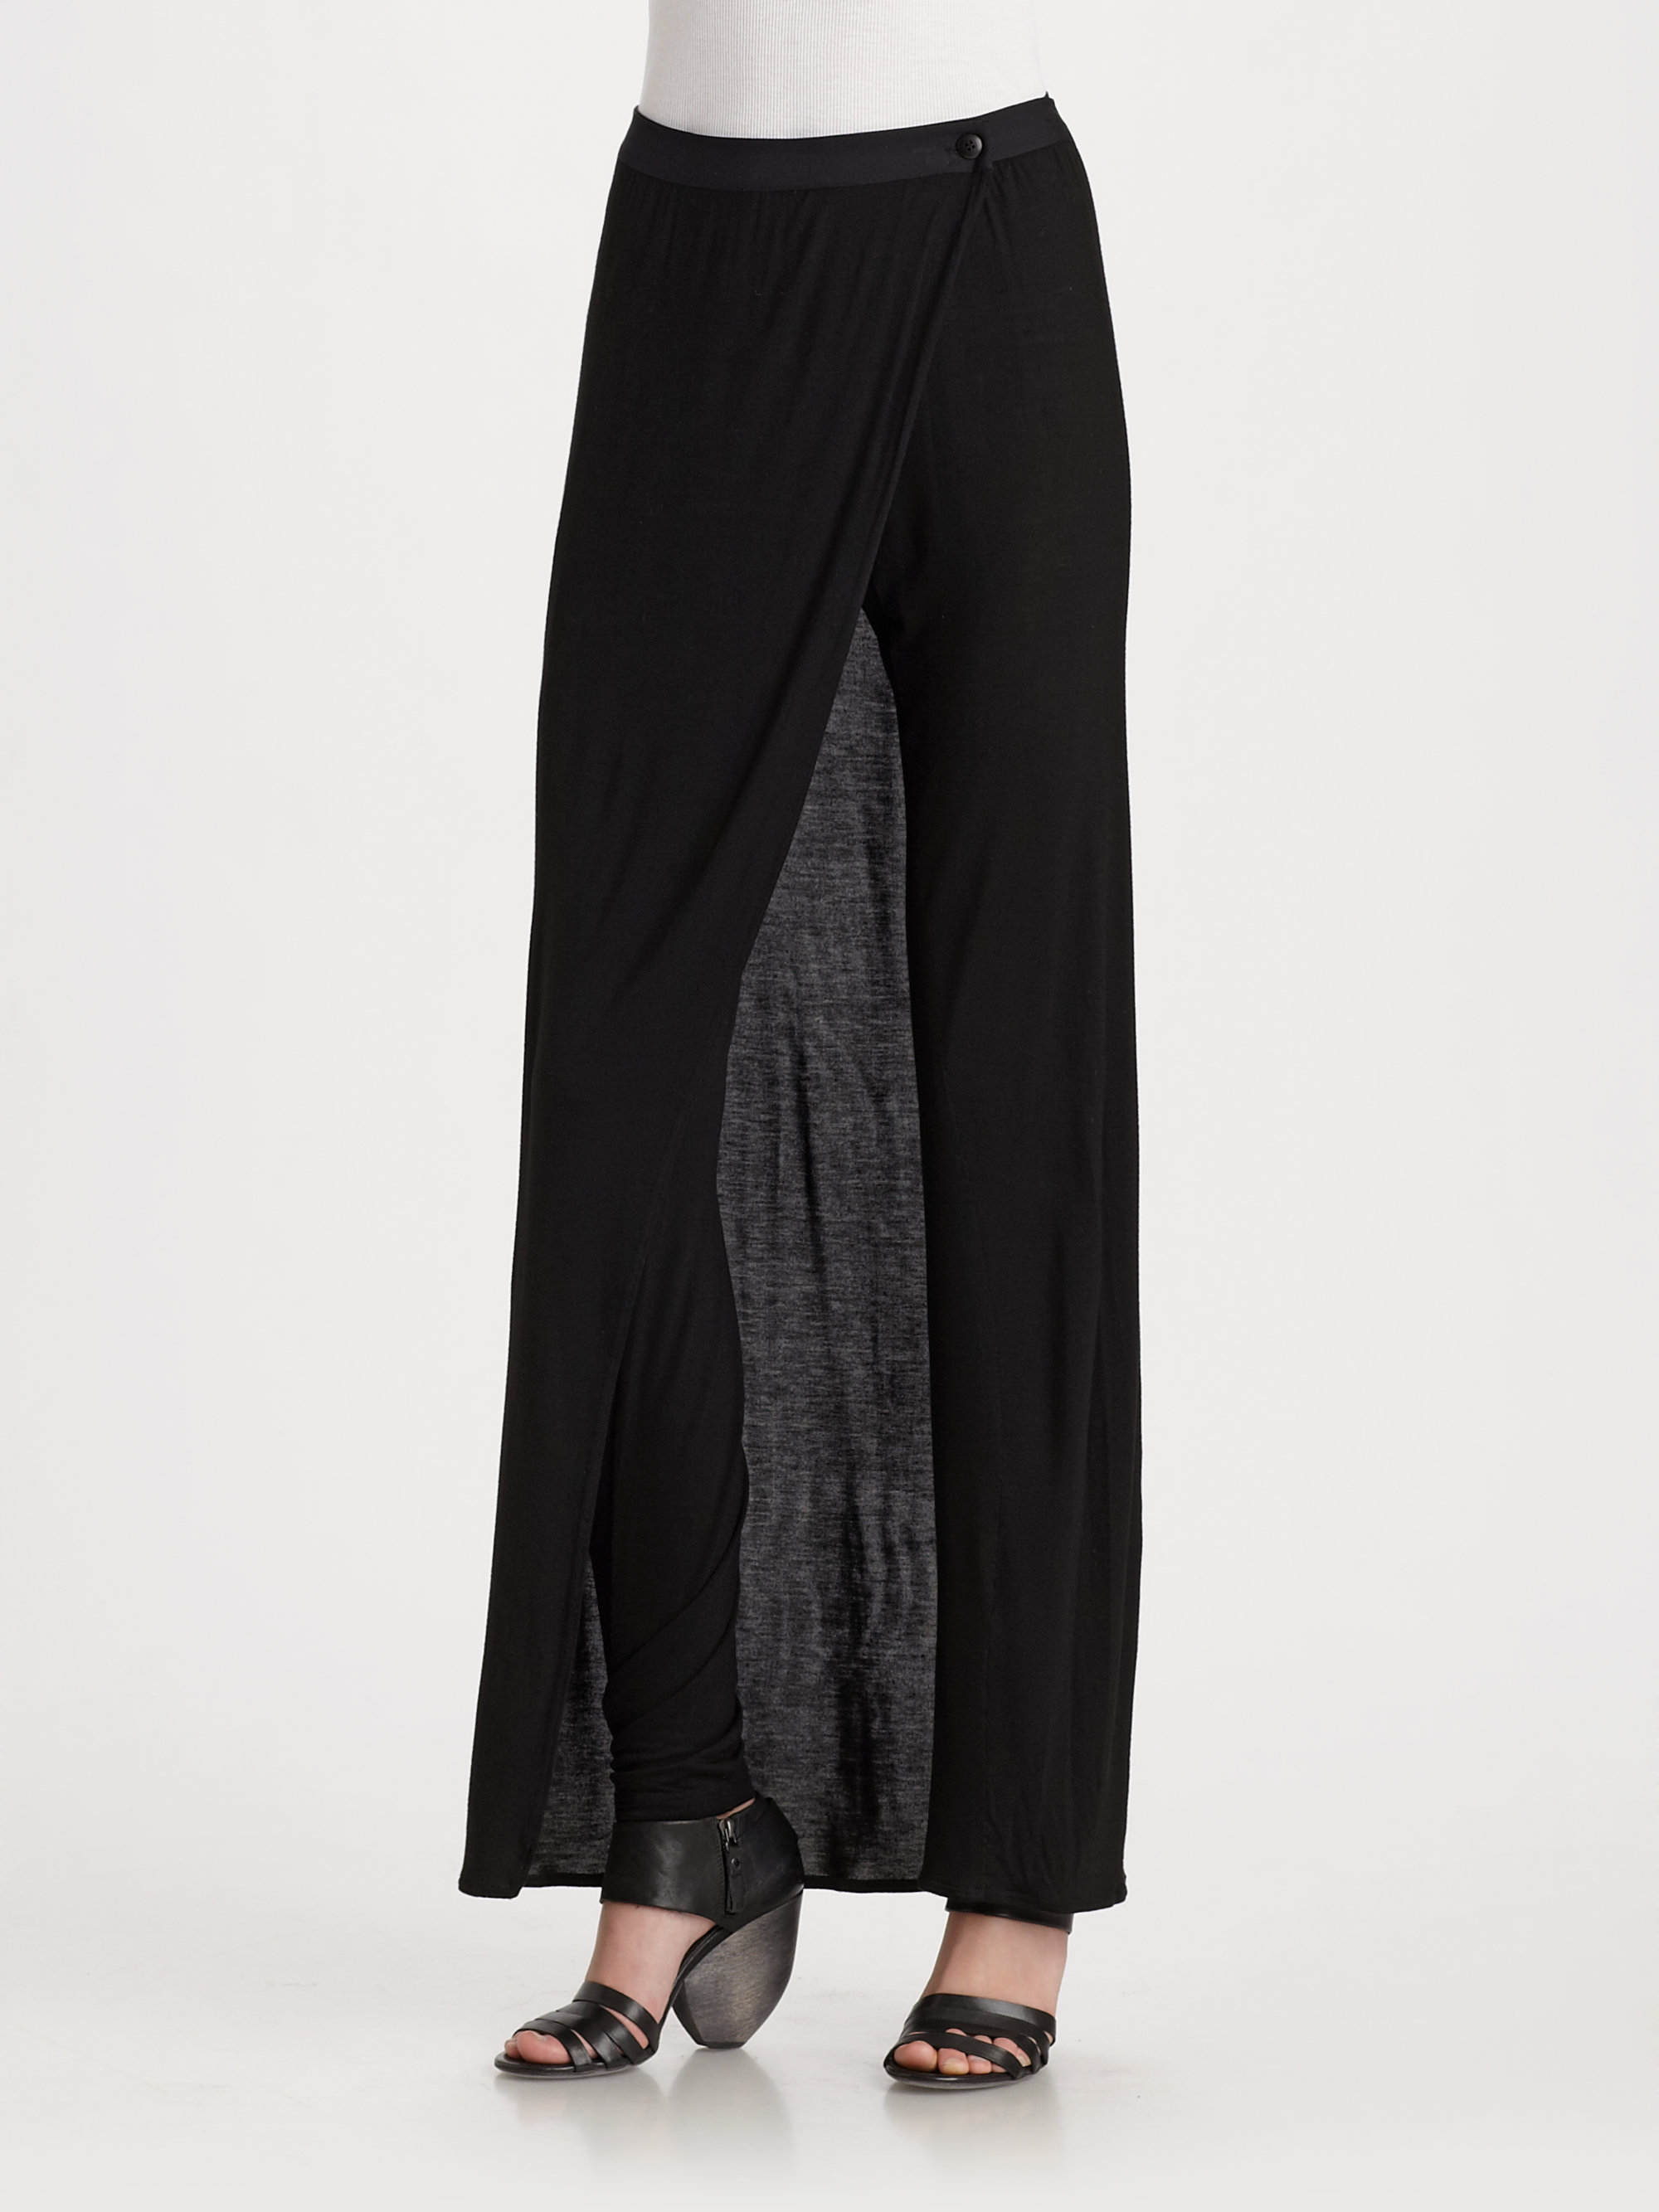 Kimberly ovitz Canute Skirt and Pants Combo in Black | Lyst